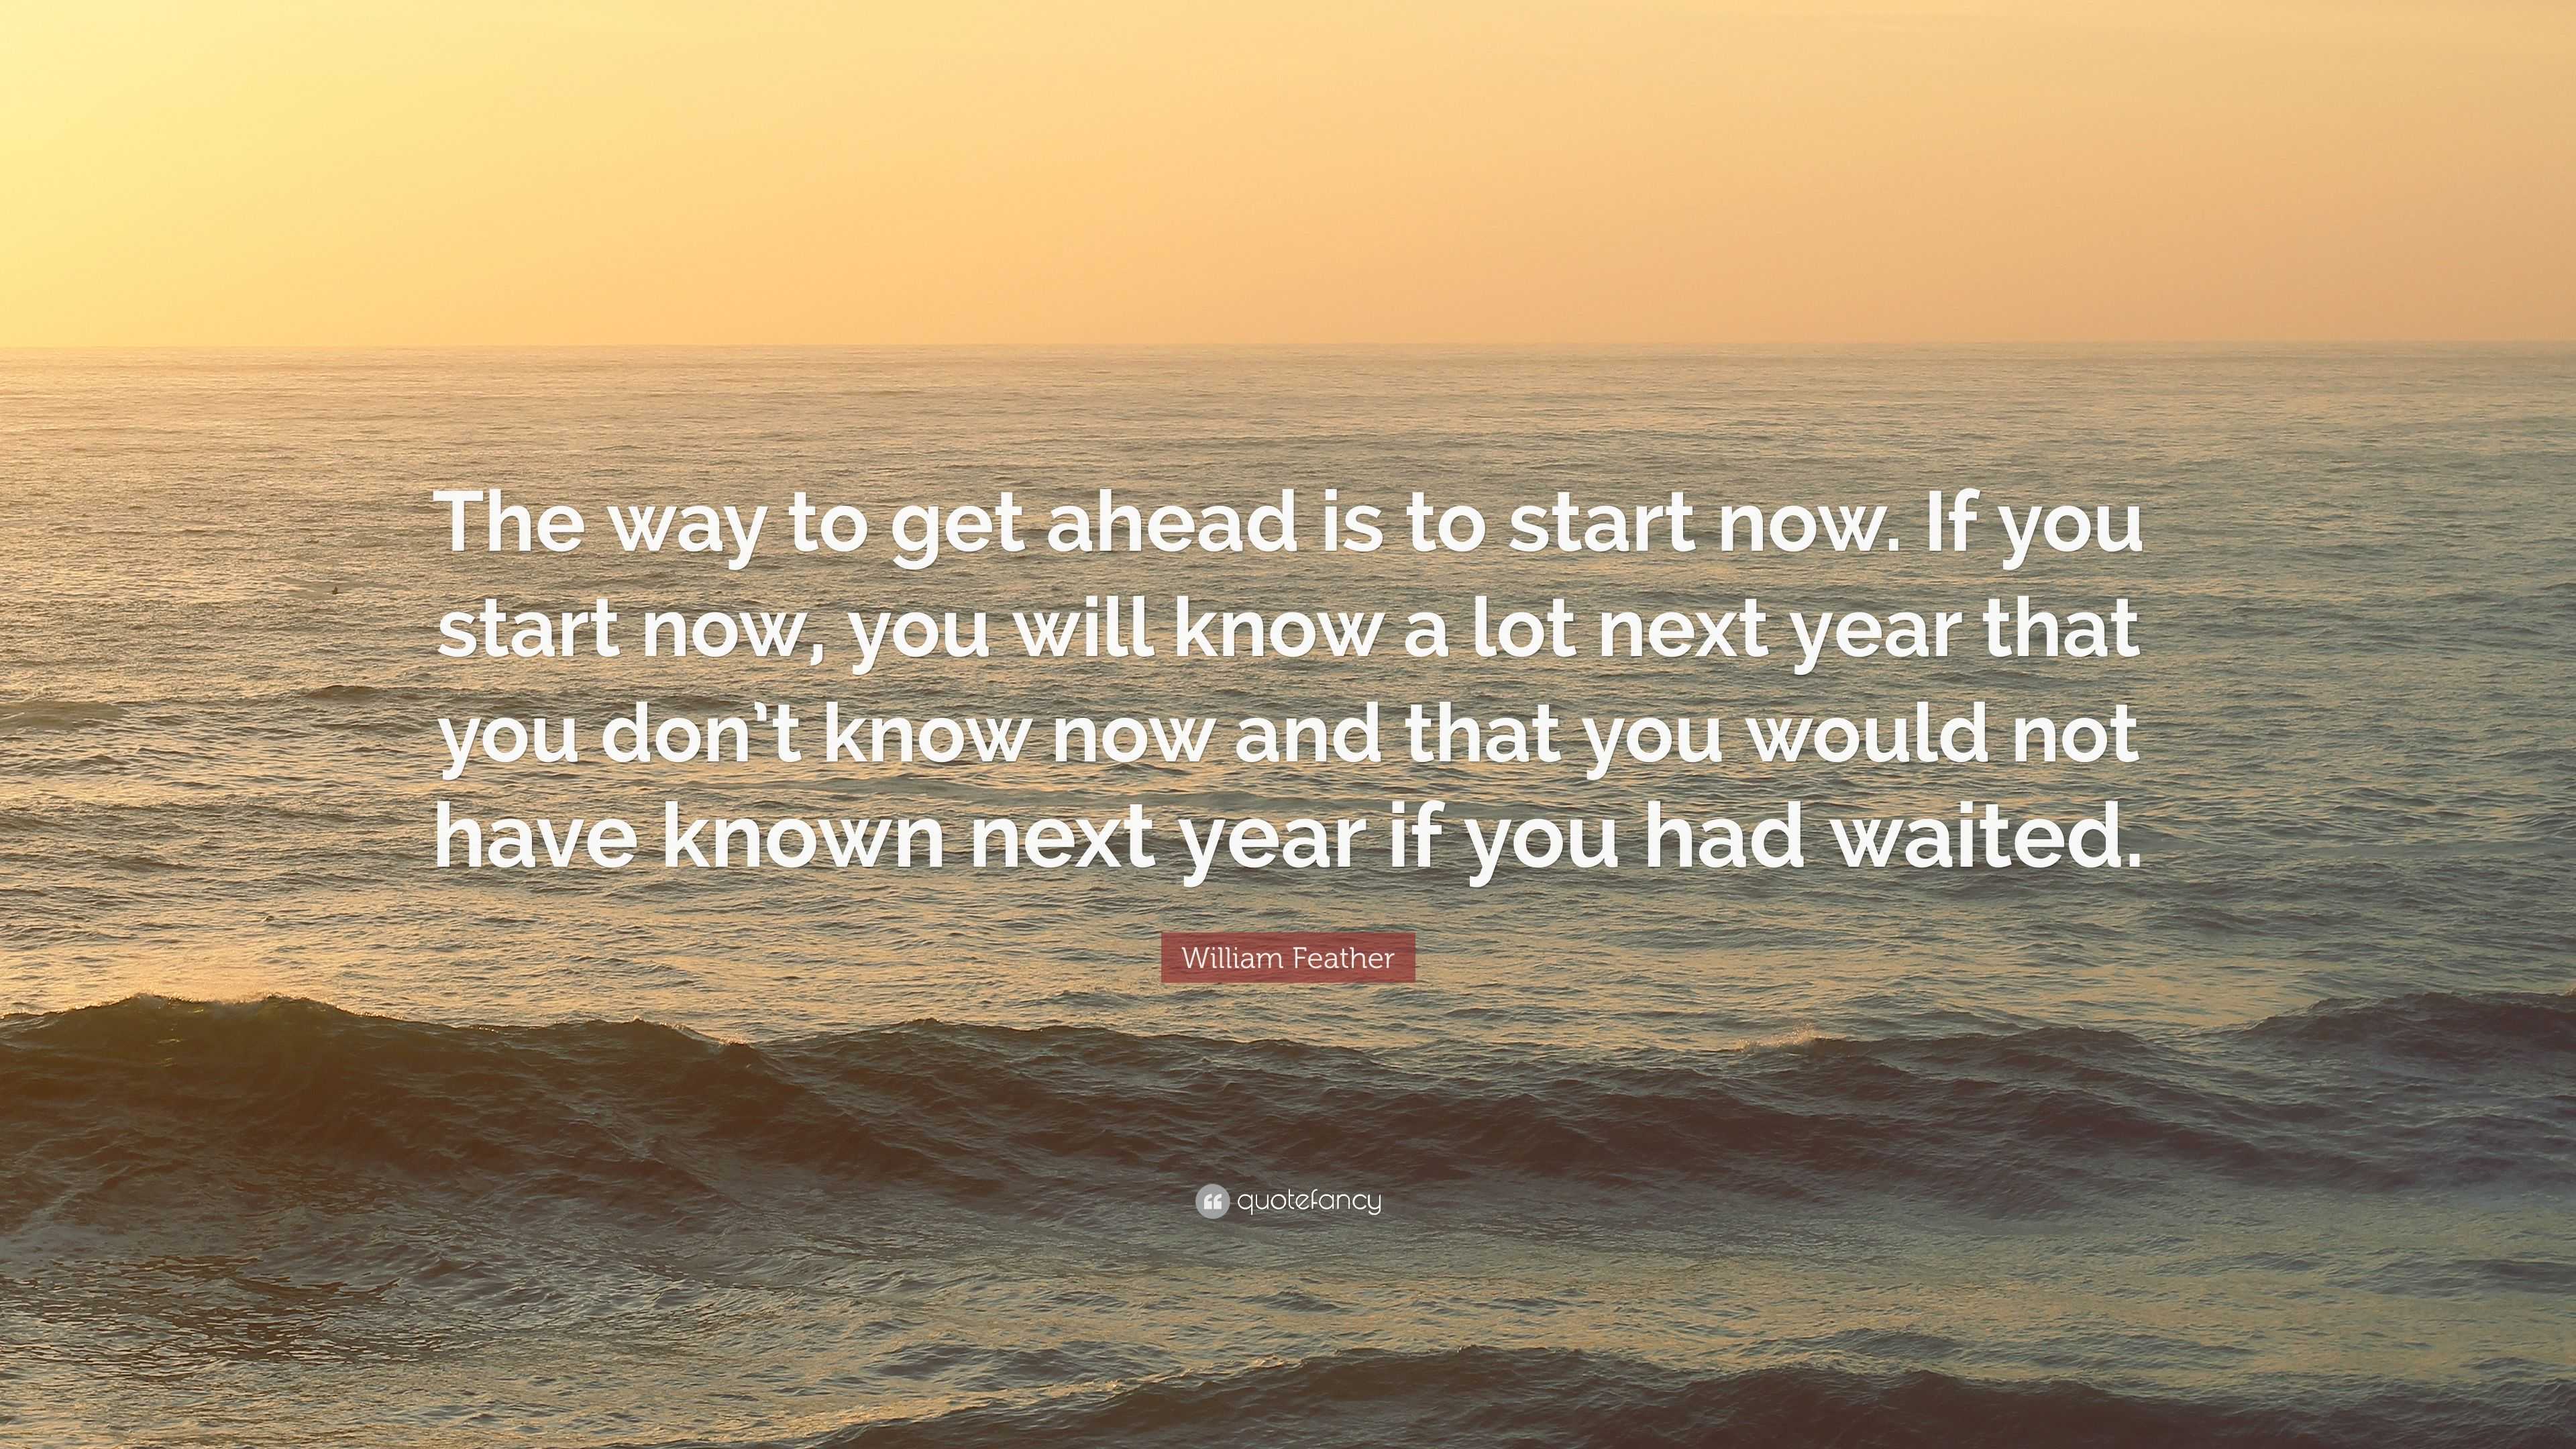 William Feather Quote: “The way to get ahead is to start now. If you